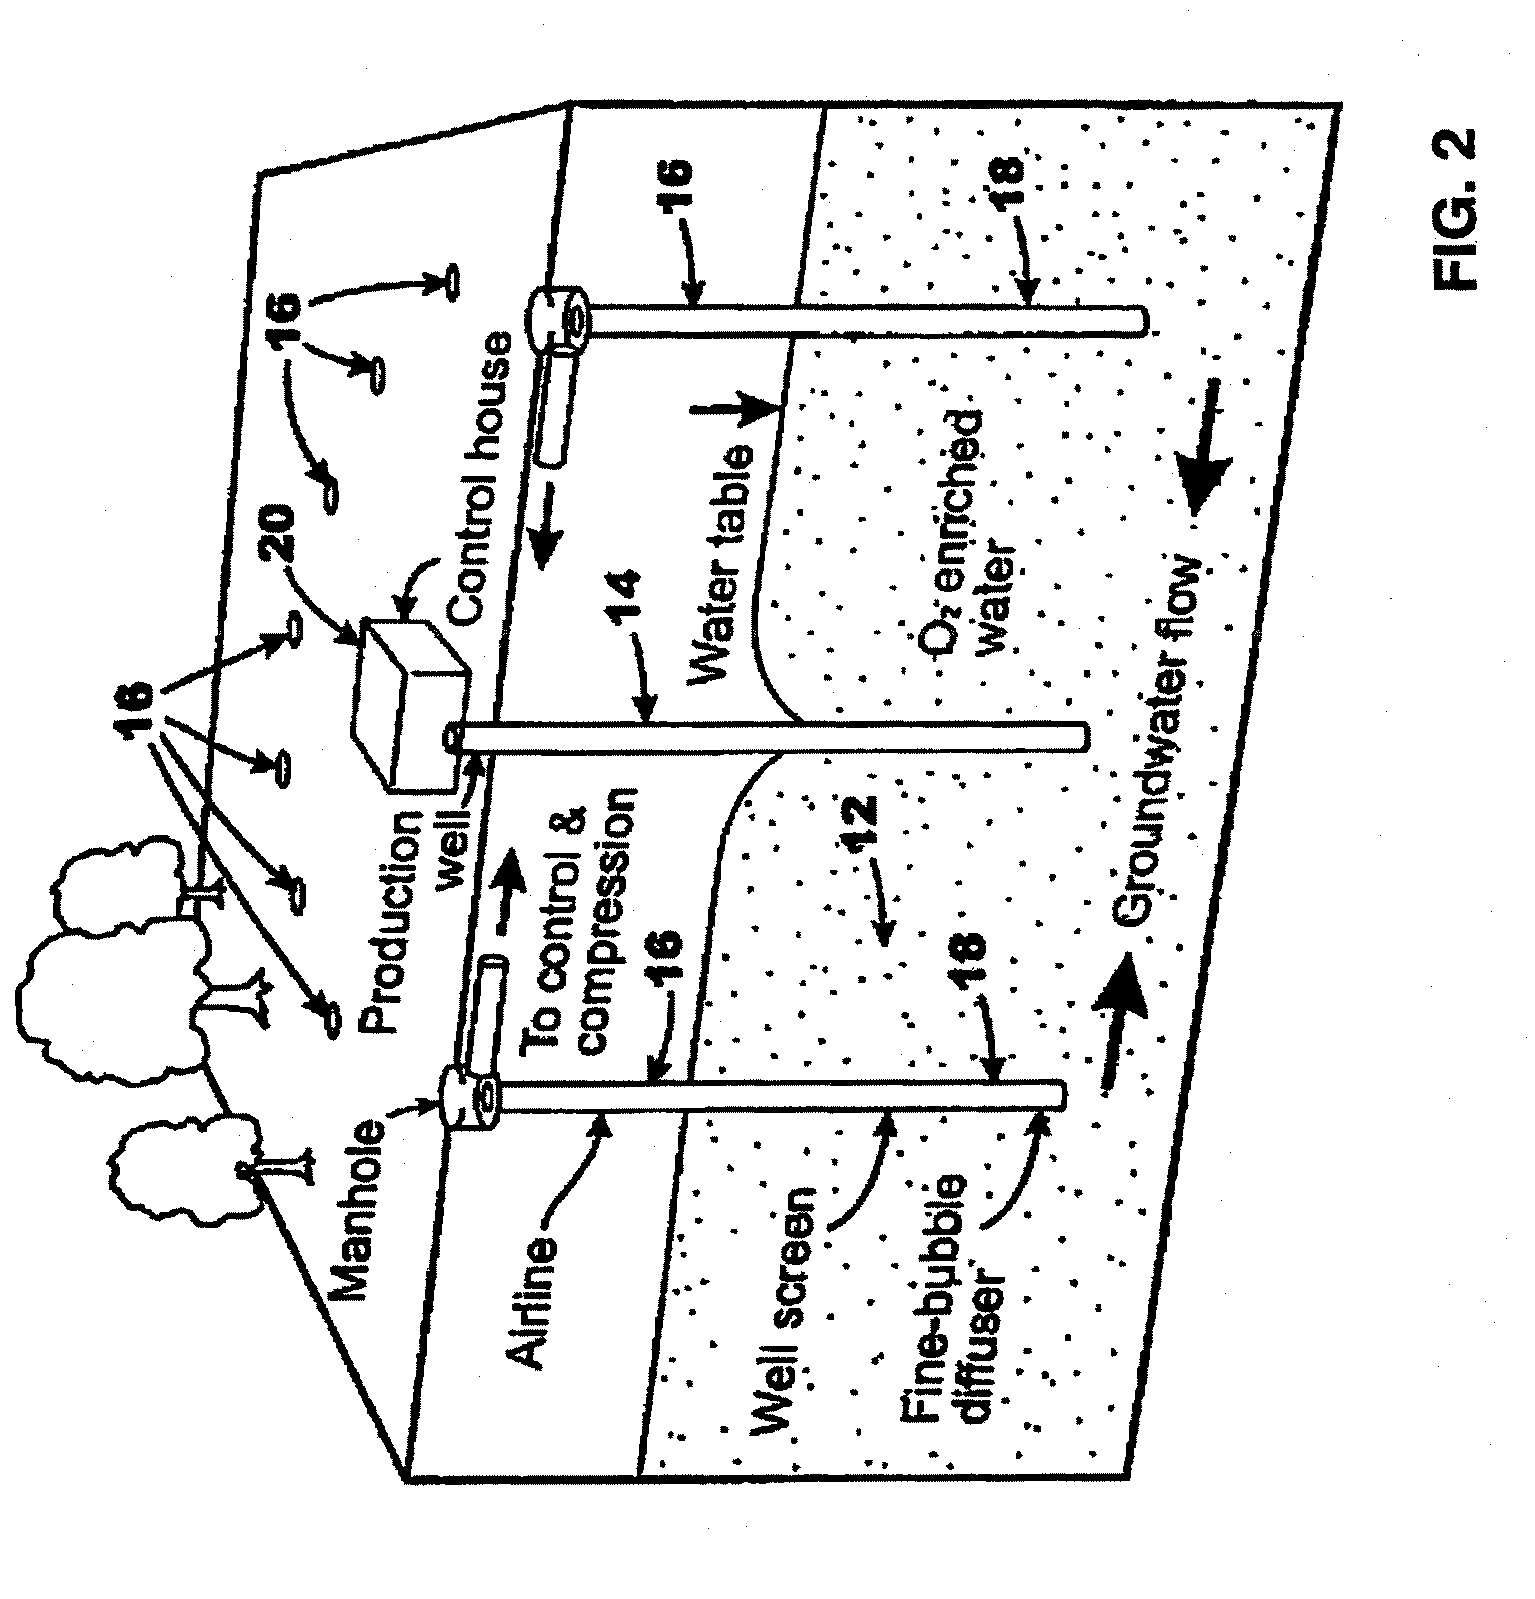 Apparatus, method and system of treatment of arsenic and other impurities in ground water